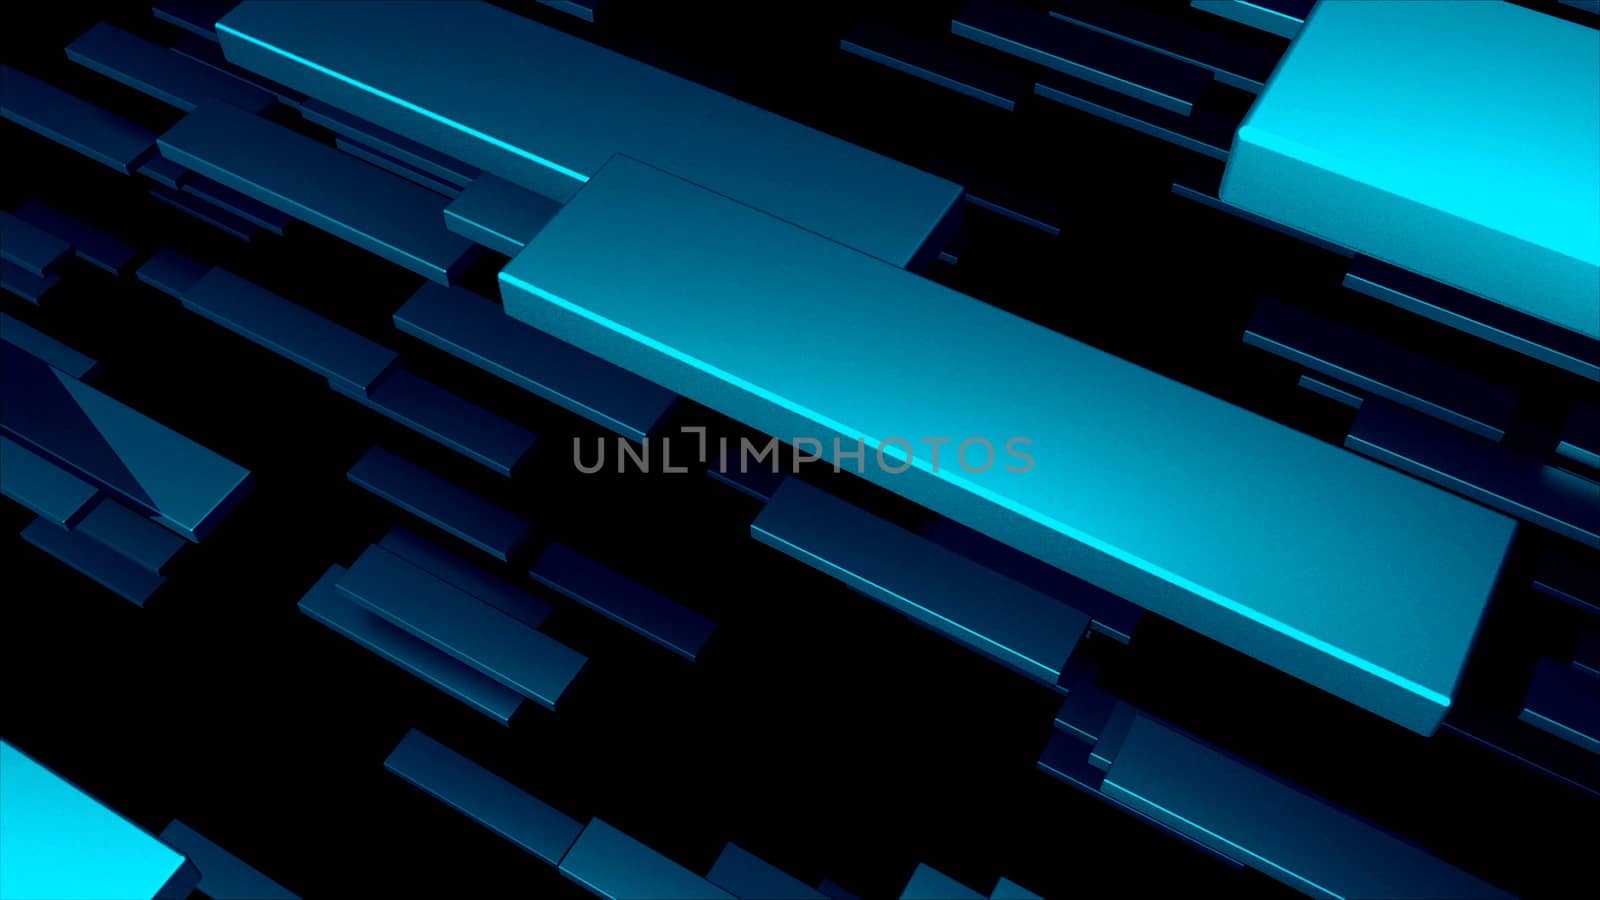 Many 3D metallic blocks are in space, computer generated modern abstract background, 3d rendering